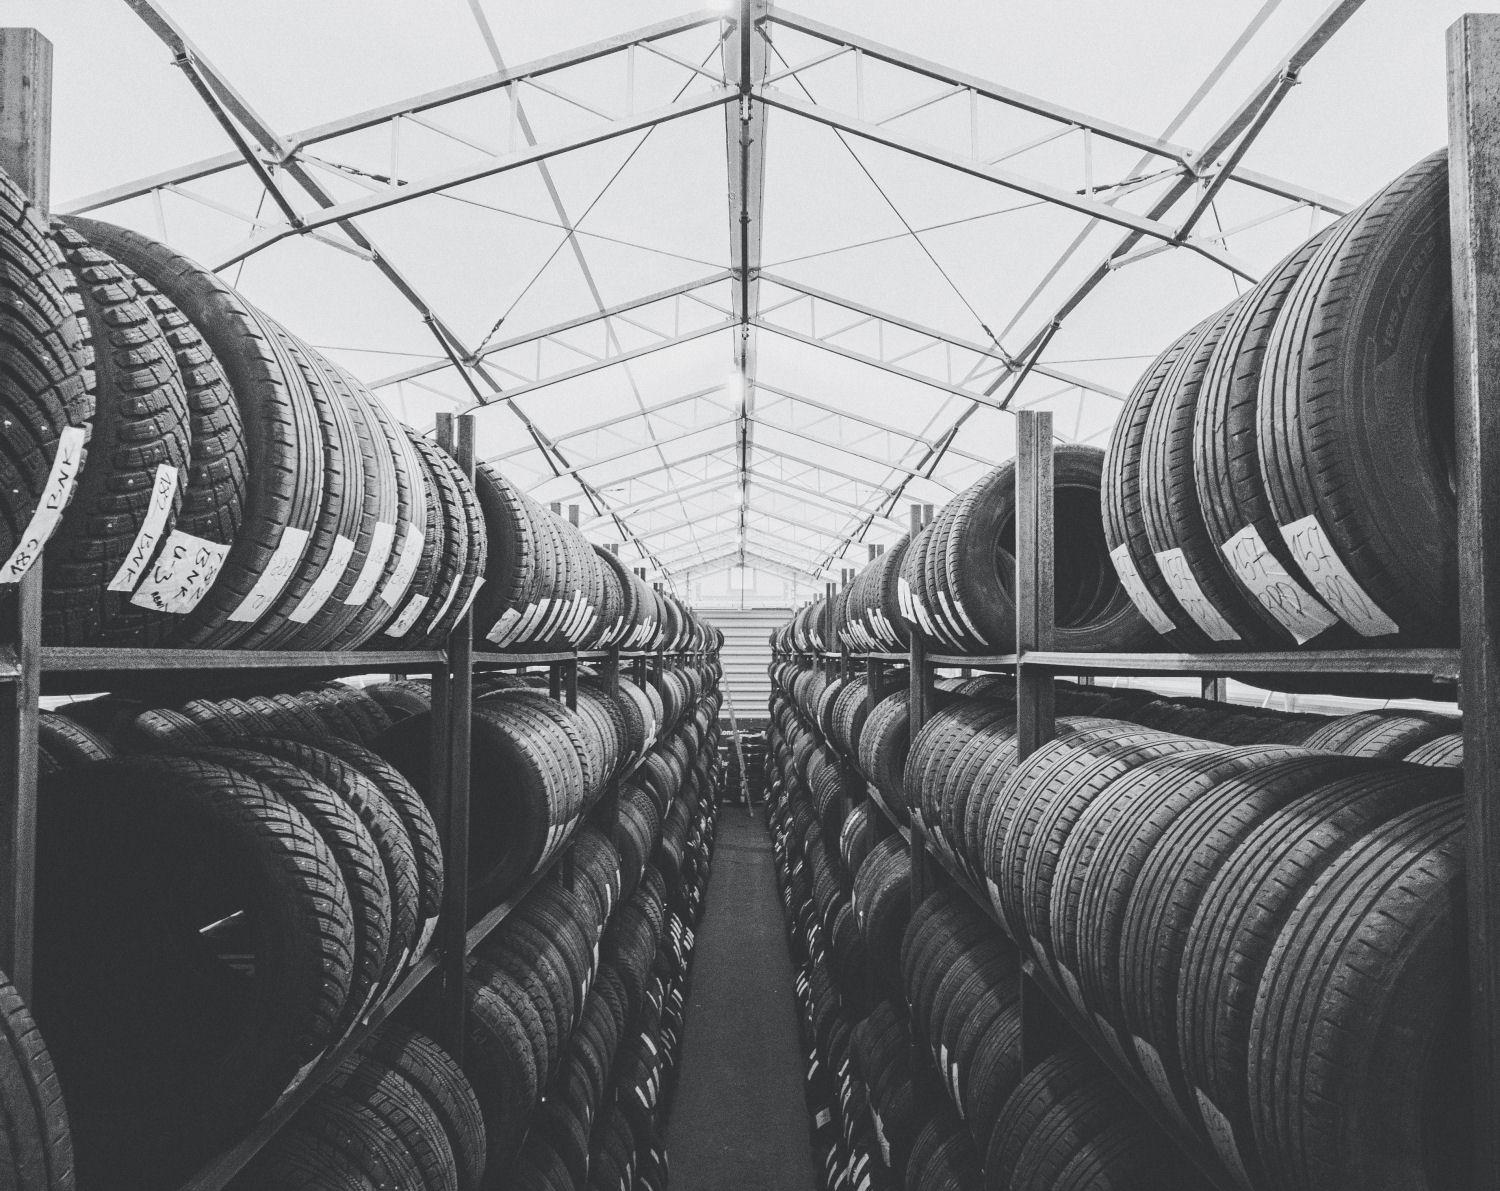 Warehouse full of car tires laid out on the shelves